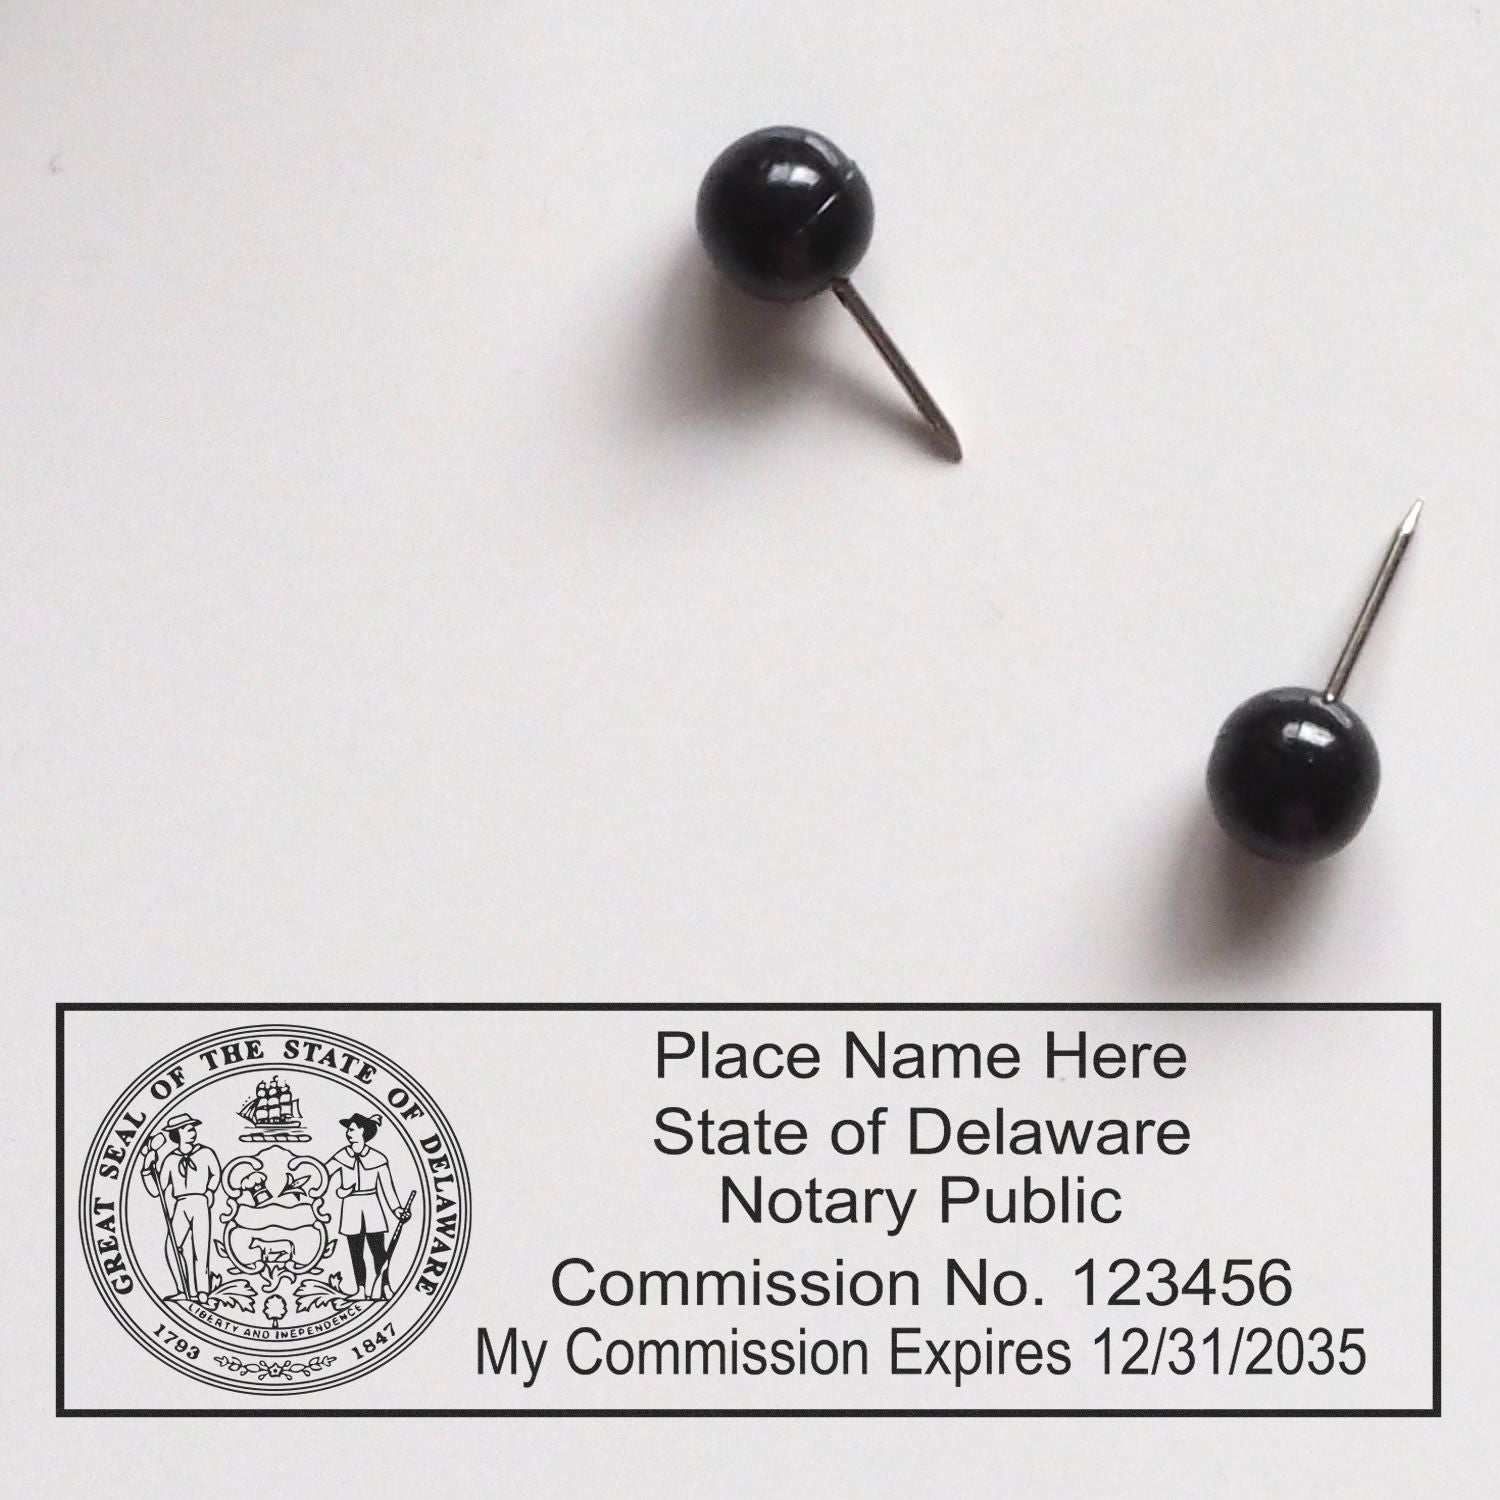 Another Example of a stamped impression of the Self-Inking State Seal Delaware Notary Stamp on a piece of office paper.